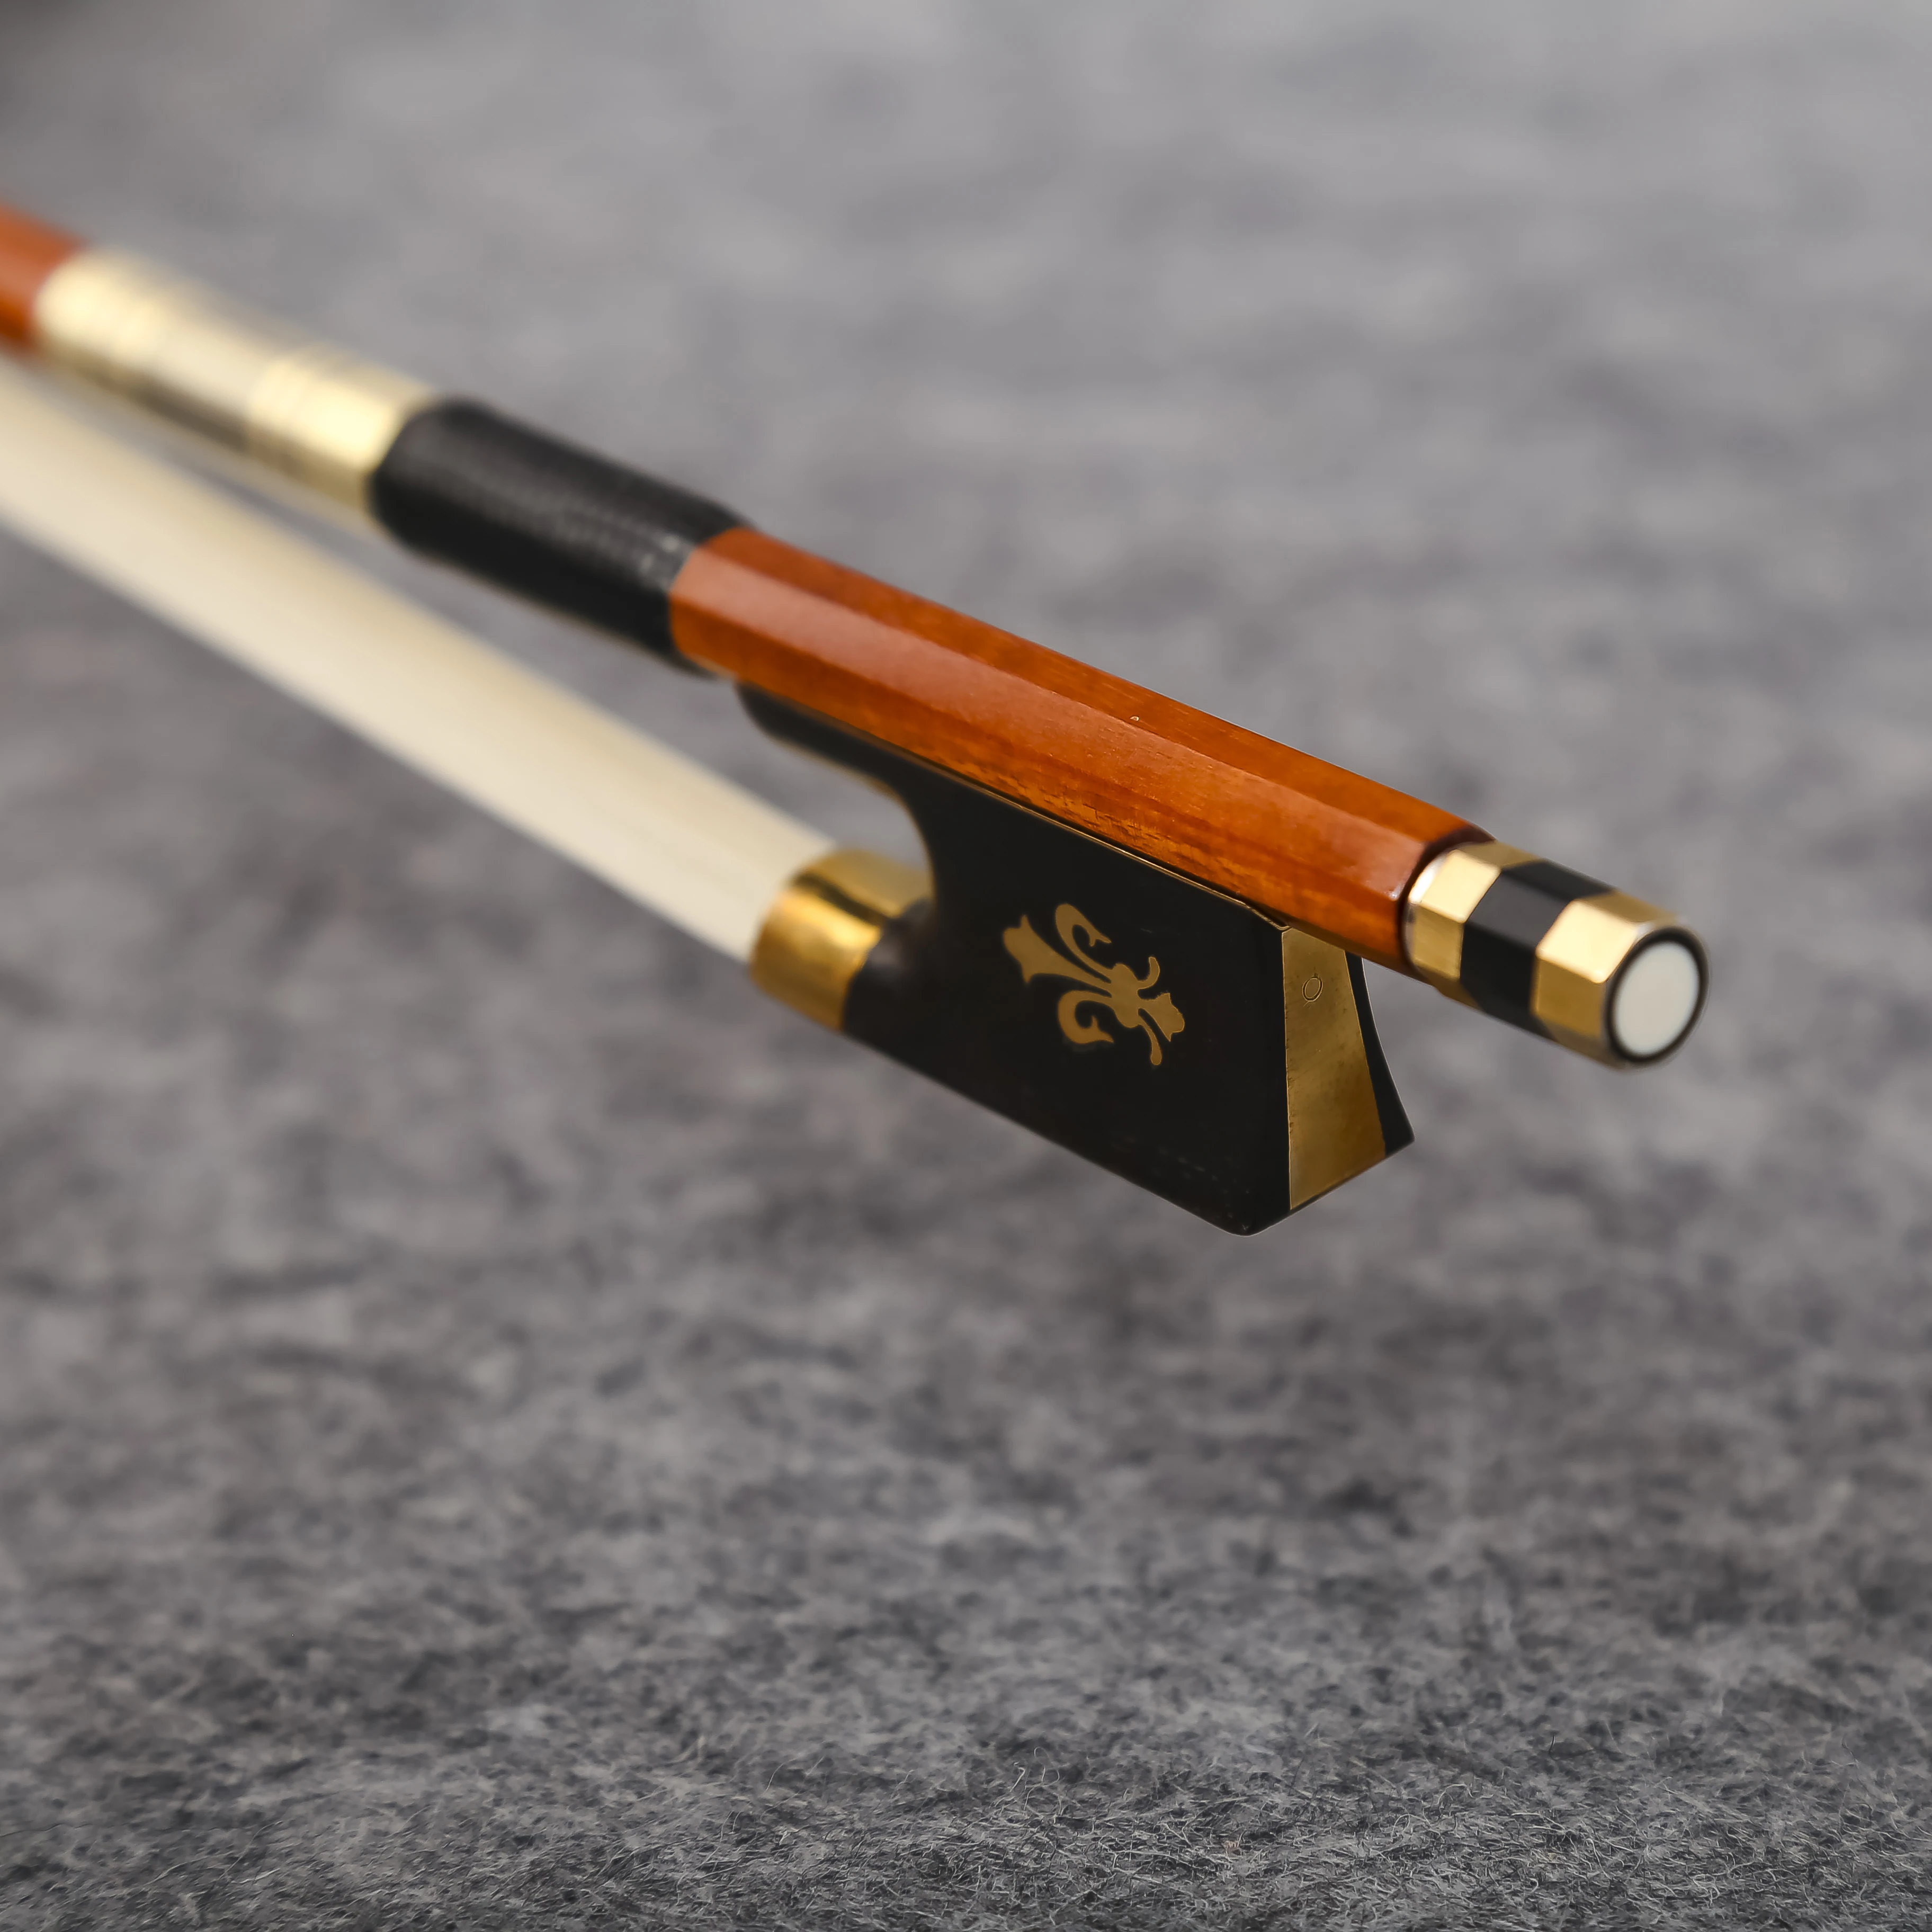 FREE SHIPPING Pernambuco Violin Bow 4/4 Top Quality Round Stick With Solid Gold Ebony Frog and Coloured Abalone Slide FP982B enlarge